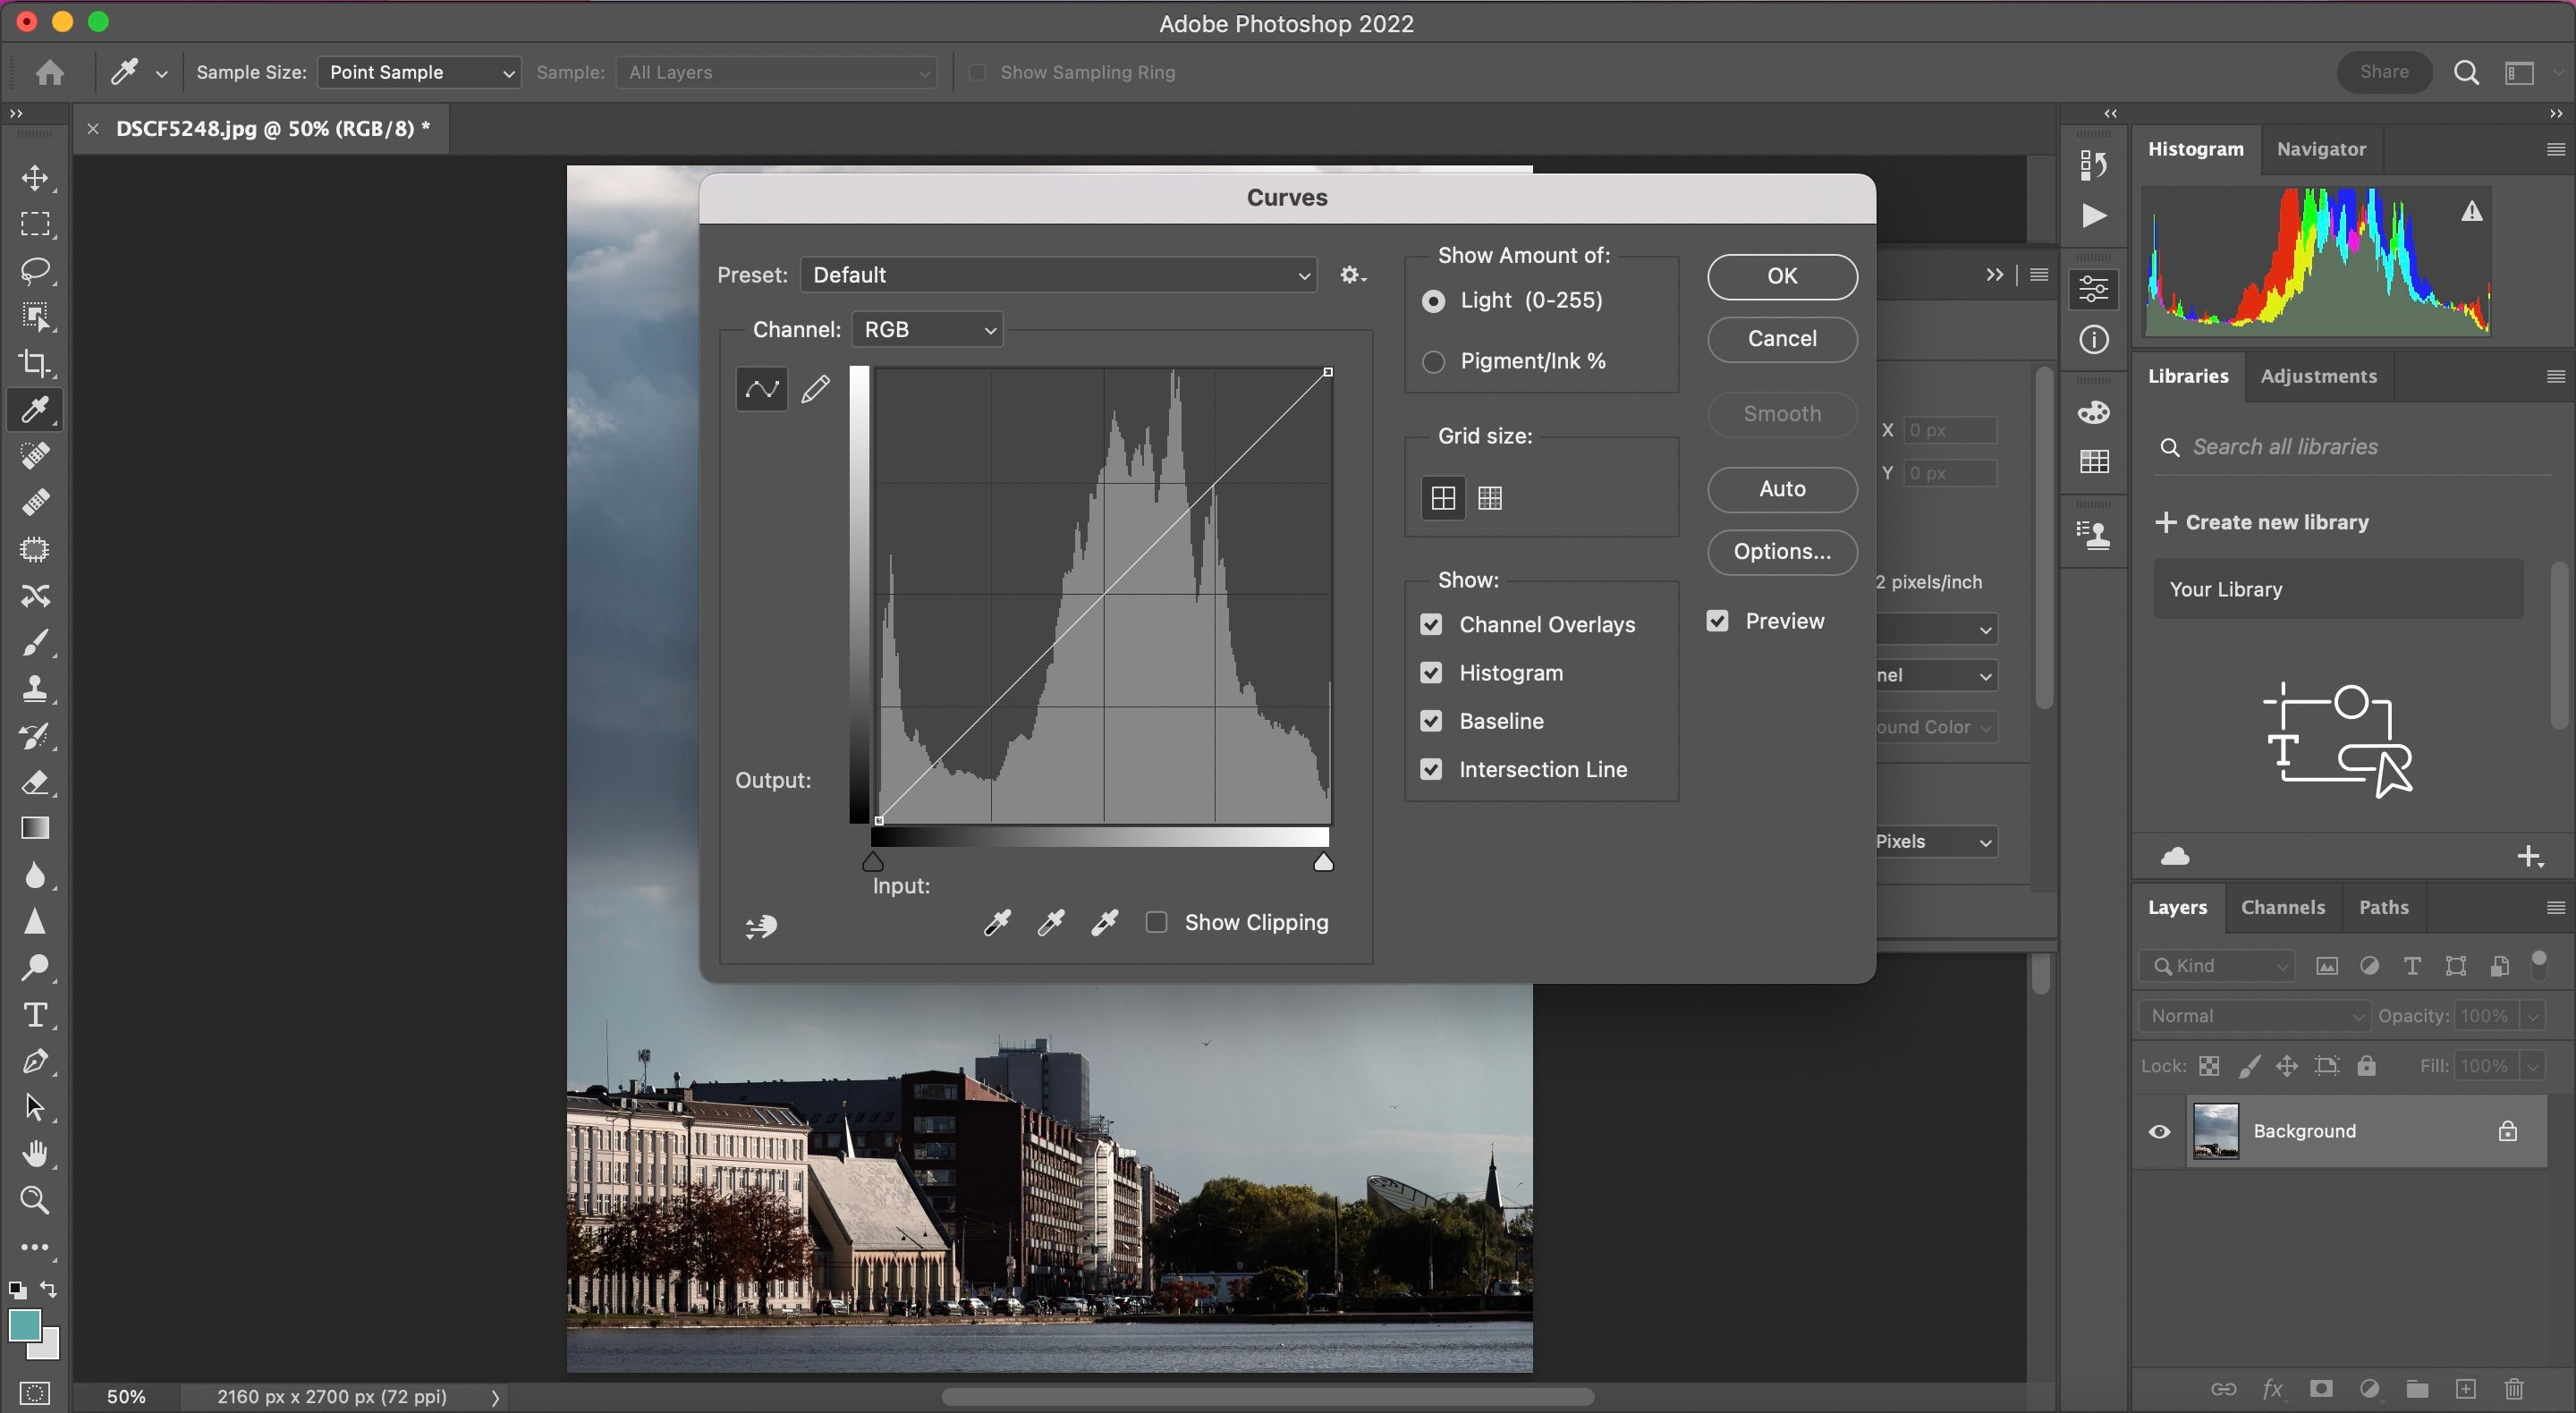 Screenshot showing the Curves tool in Photoshop